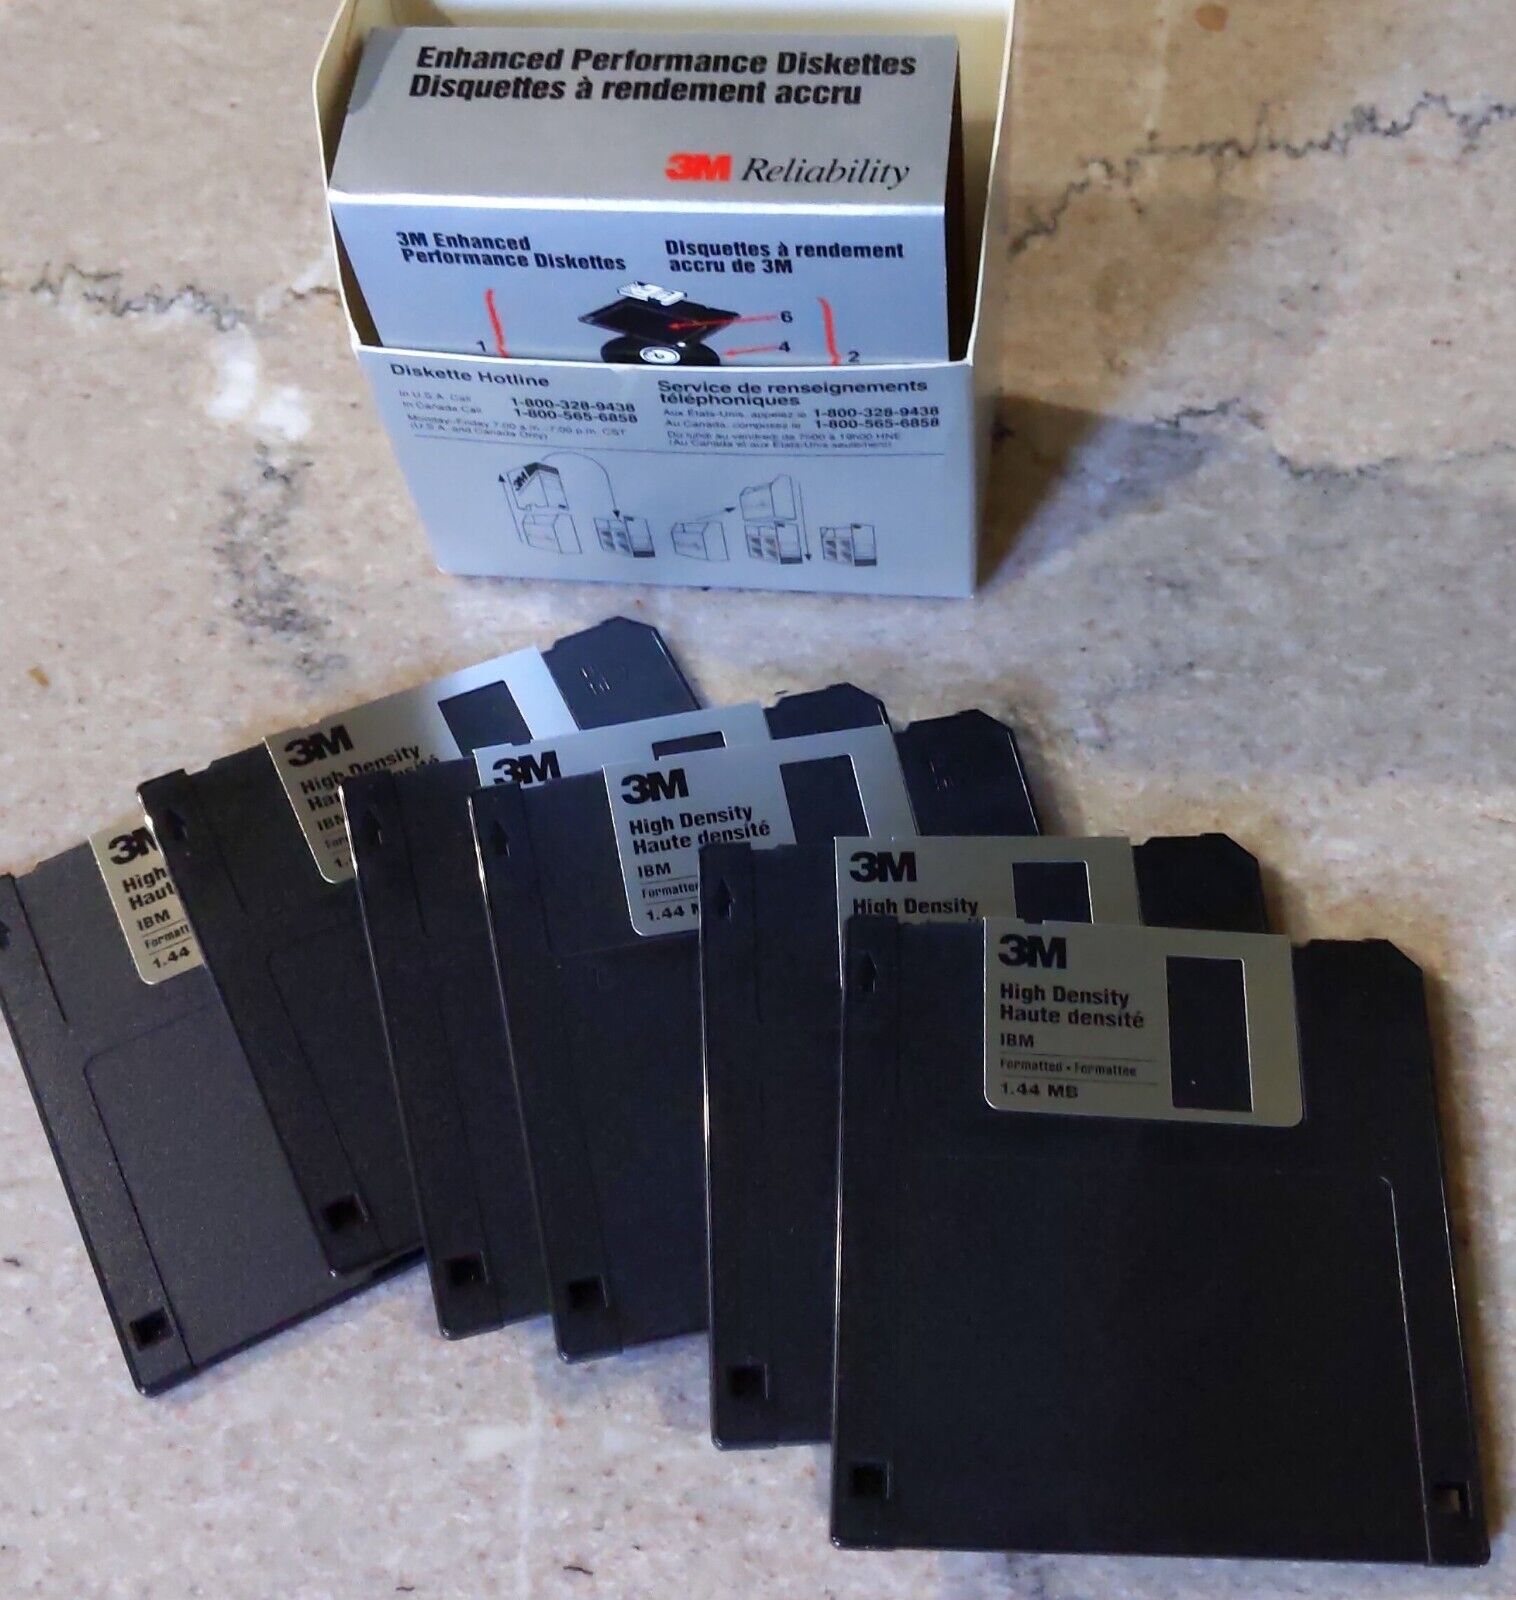 Set of Six New 3M Enhanced Performance Diskettes (1994), opened package